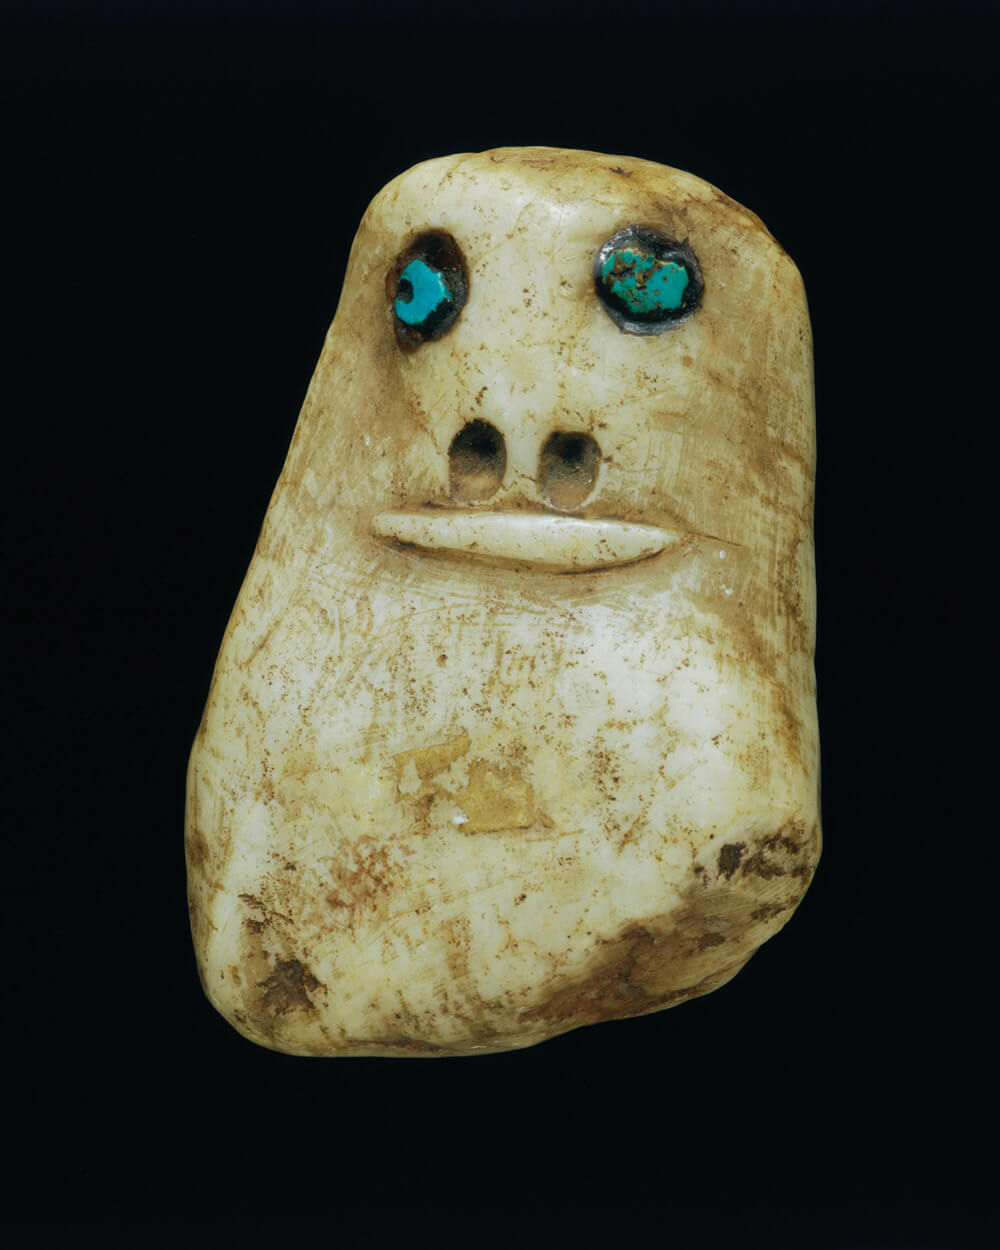 An undated photograph of a Native American figurine from Nambe Pueblo, New Mexico. It is carved to represent a face with round, turquiose eyes.